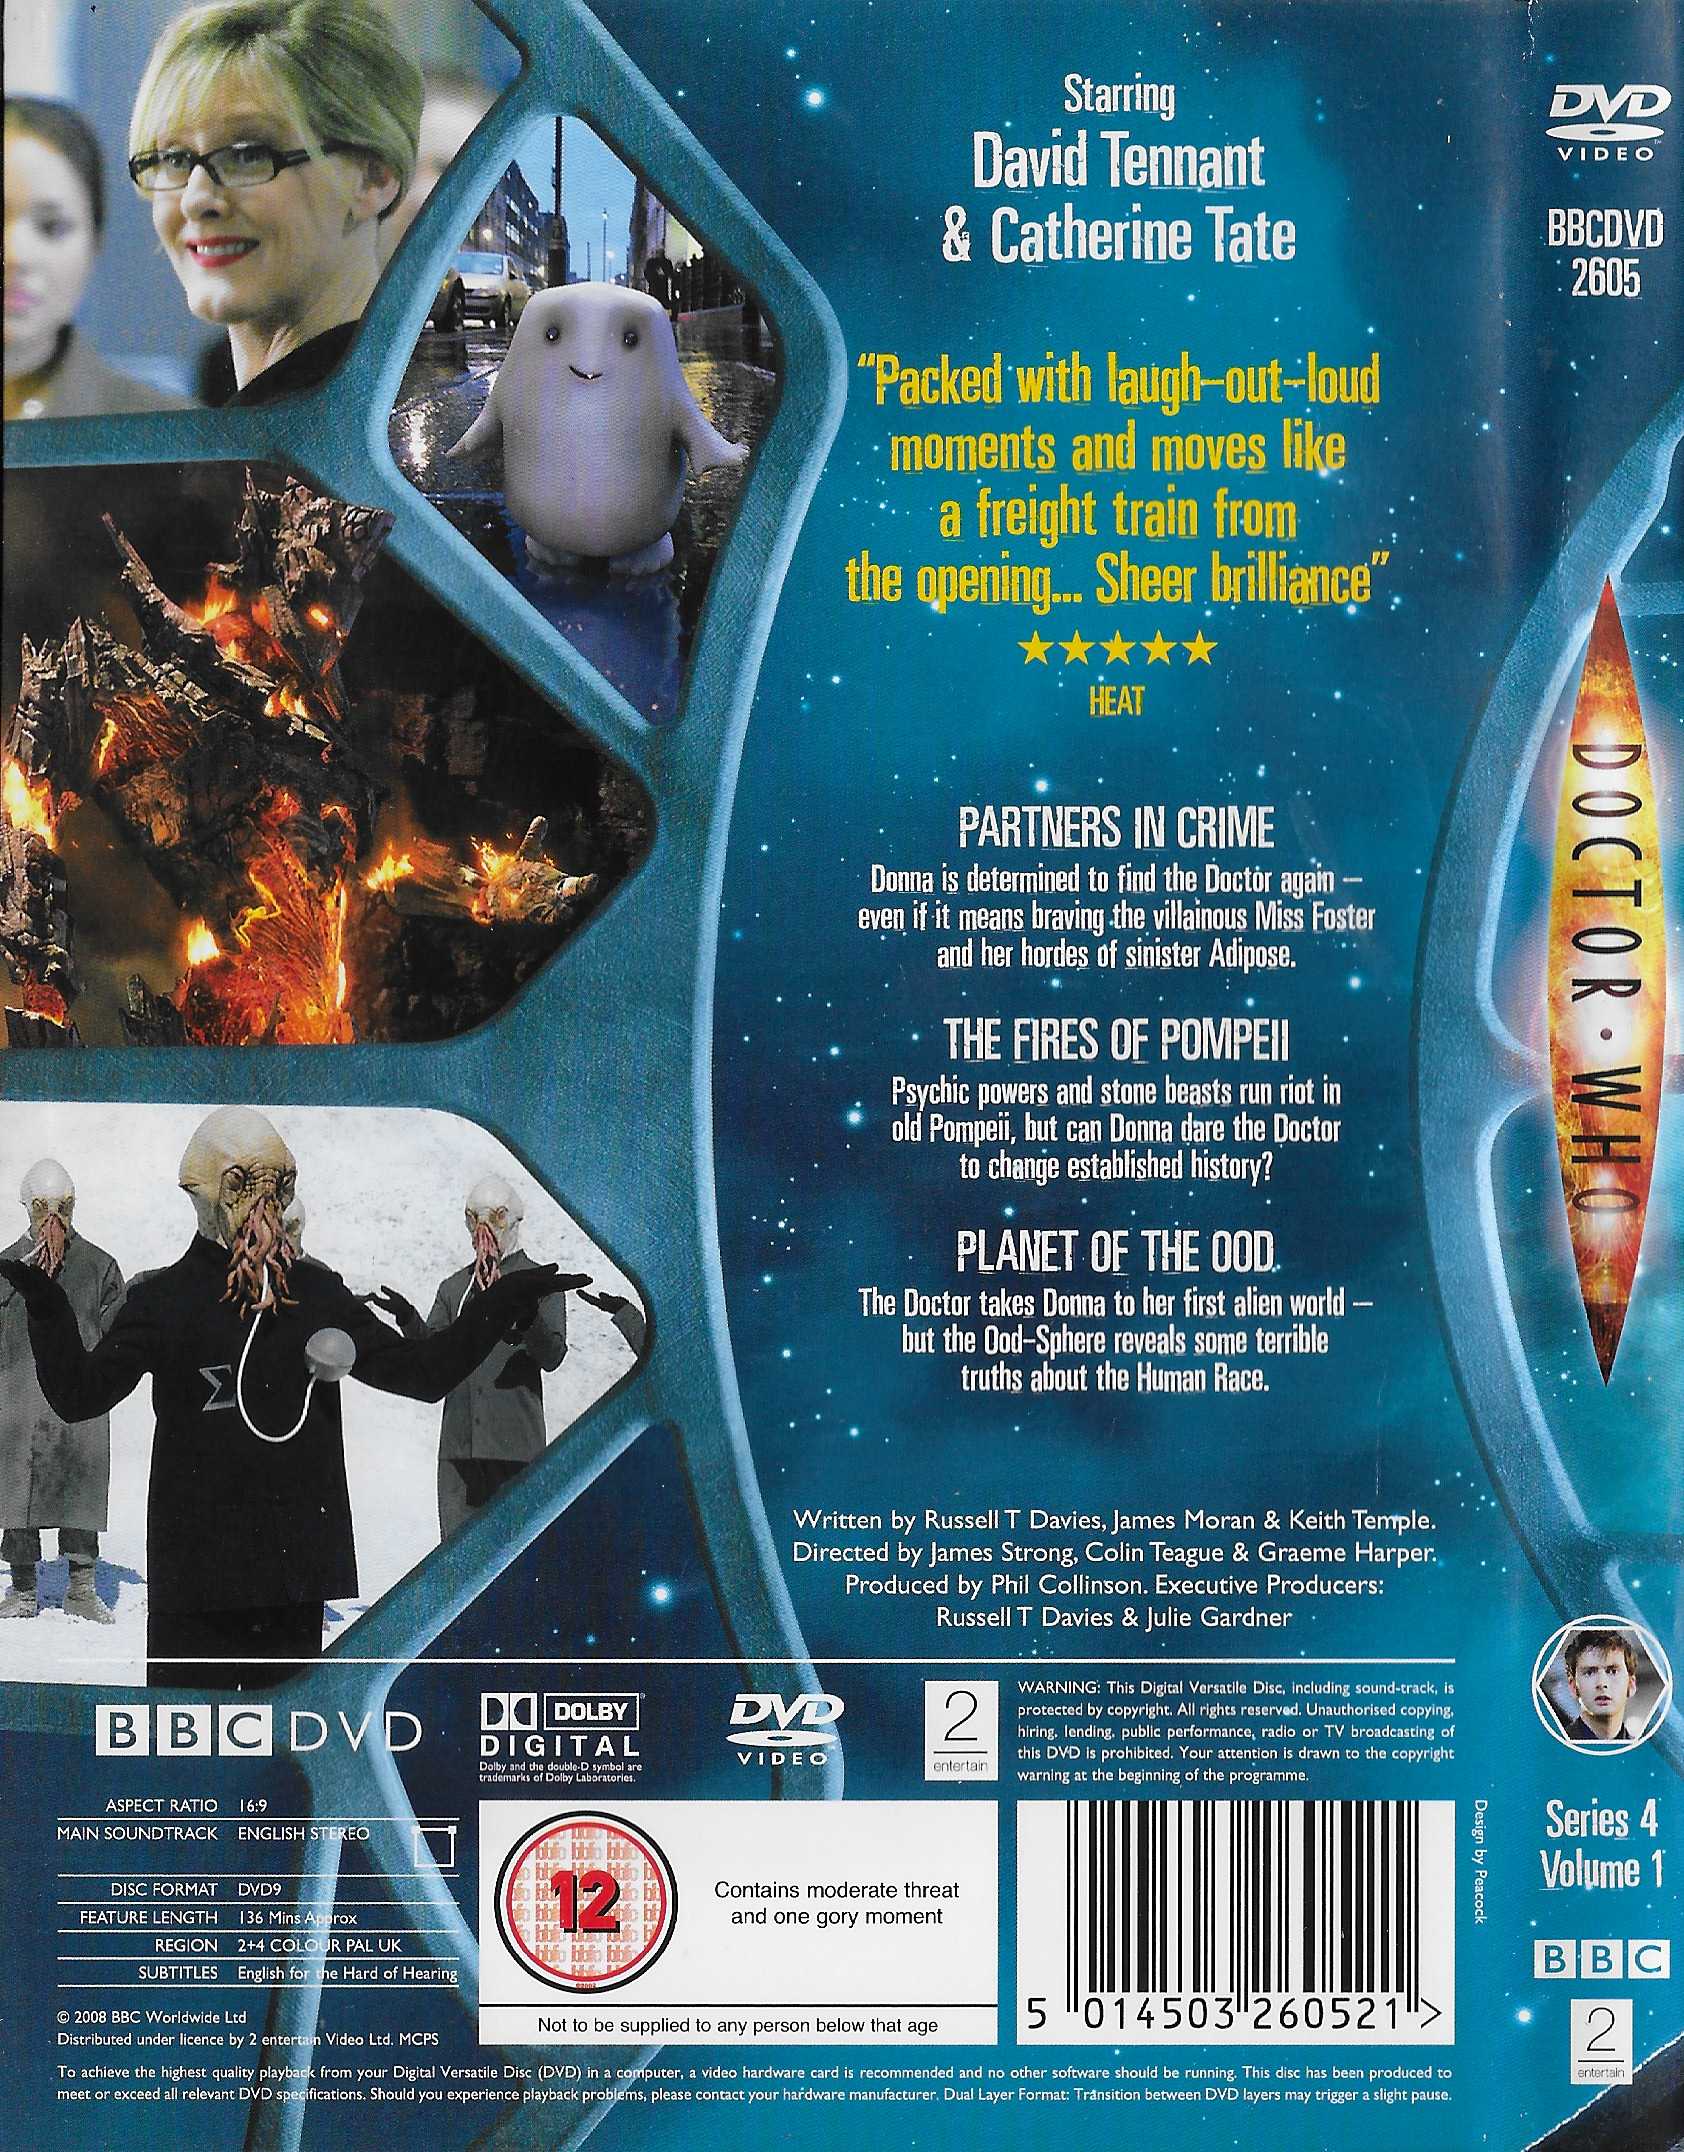 Picture of BBCDVD 2605 Doctor Who - Series 4, volume 1 by artist Russell T Davies / James Moran / Keith Temple from the BBC records and Tapes library